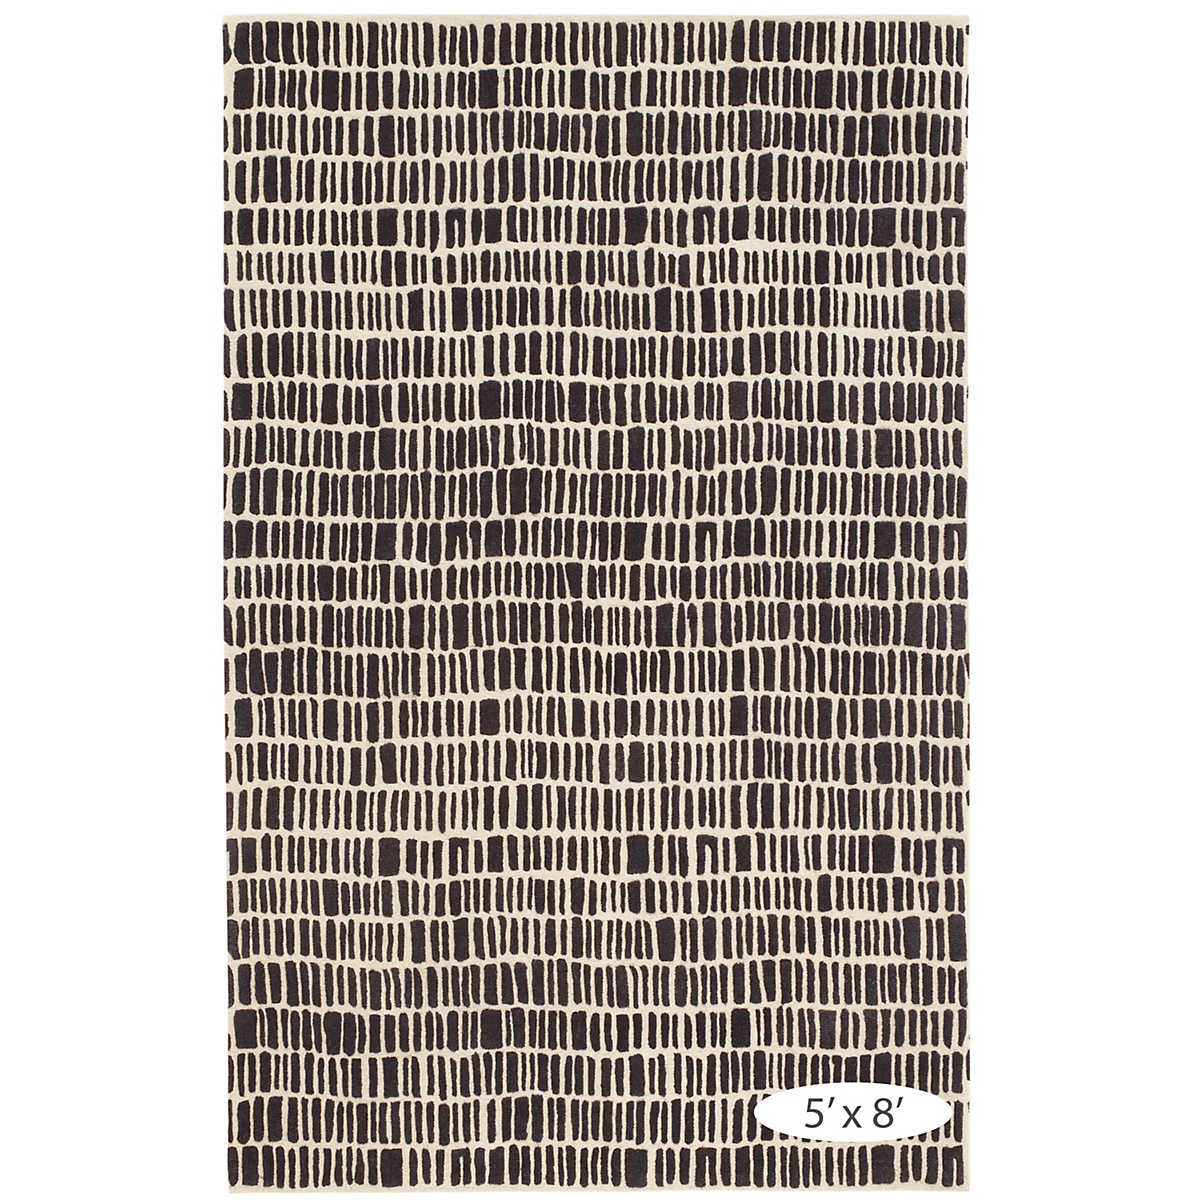 The Roark Charcoal Rug design of this luxurious, plush wool rug conjures surfaces of ancient hand-laid rock walls. The contrast between stone and mortar is further represented by the meticulously tufted high and low levels of the velvety hand-sheared pile. Amethyst Home provides interior design services, furniture, rugs, and lighting in the Des Moines metro area.